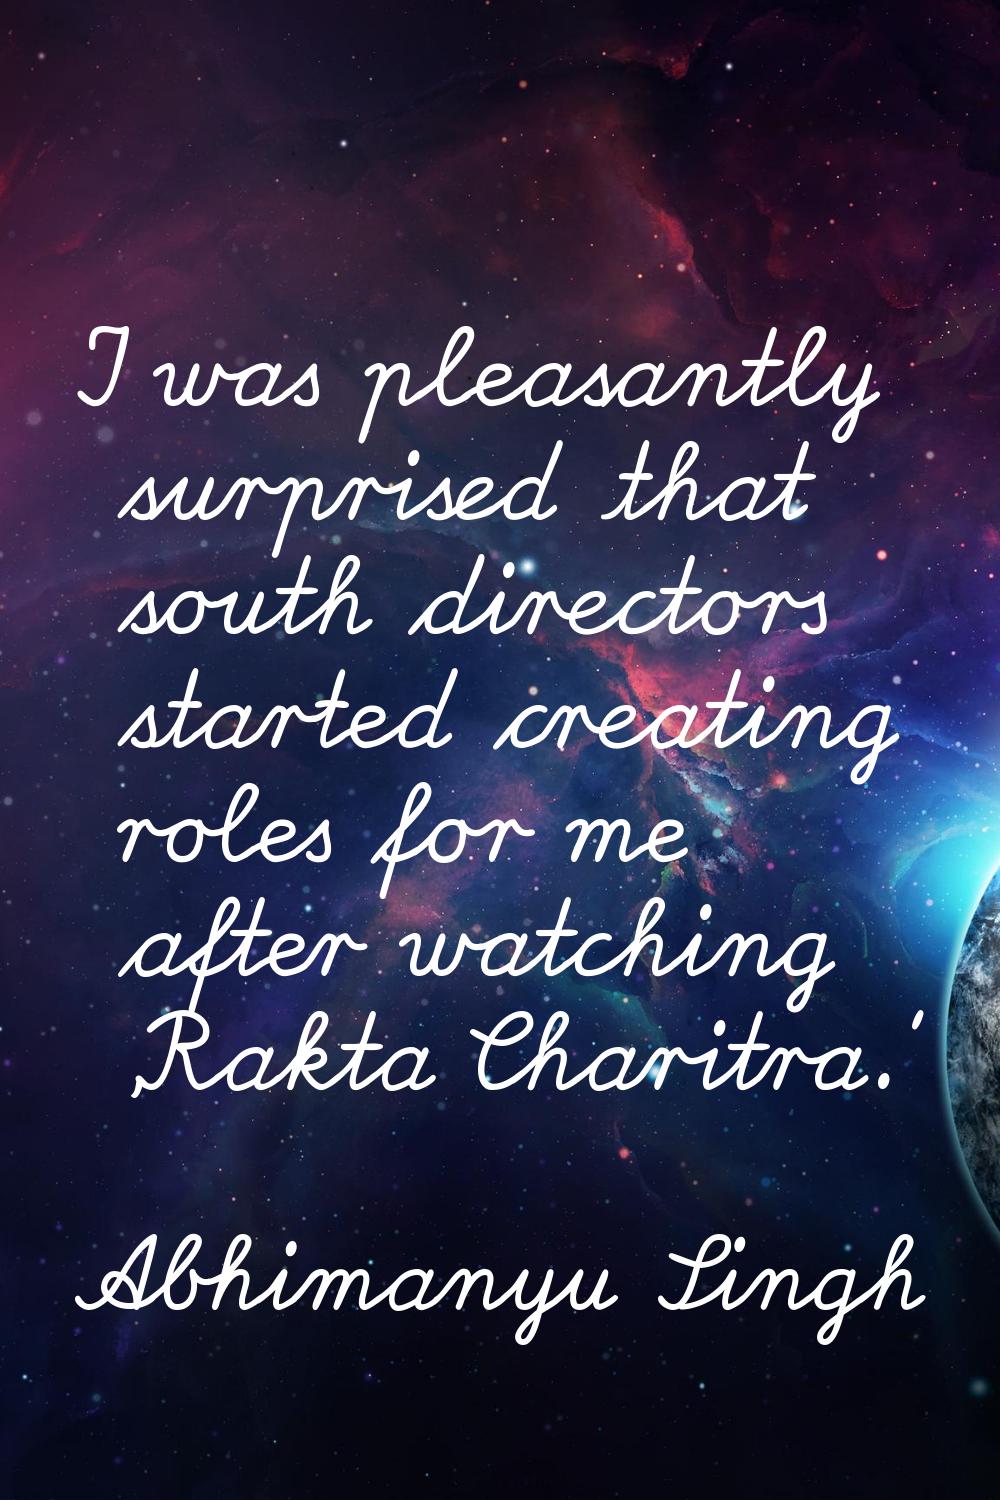 I was pleasantly surprised that south directors started creating roles for me after watching 'Rakta